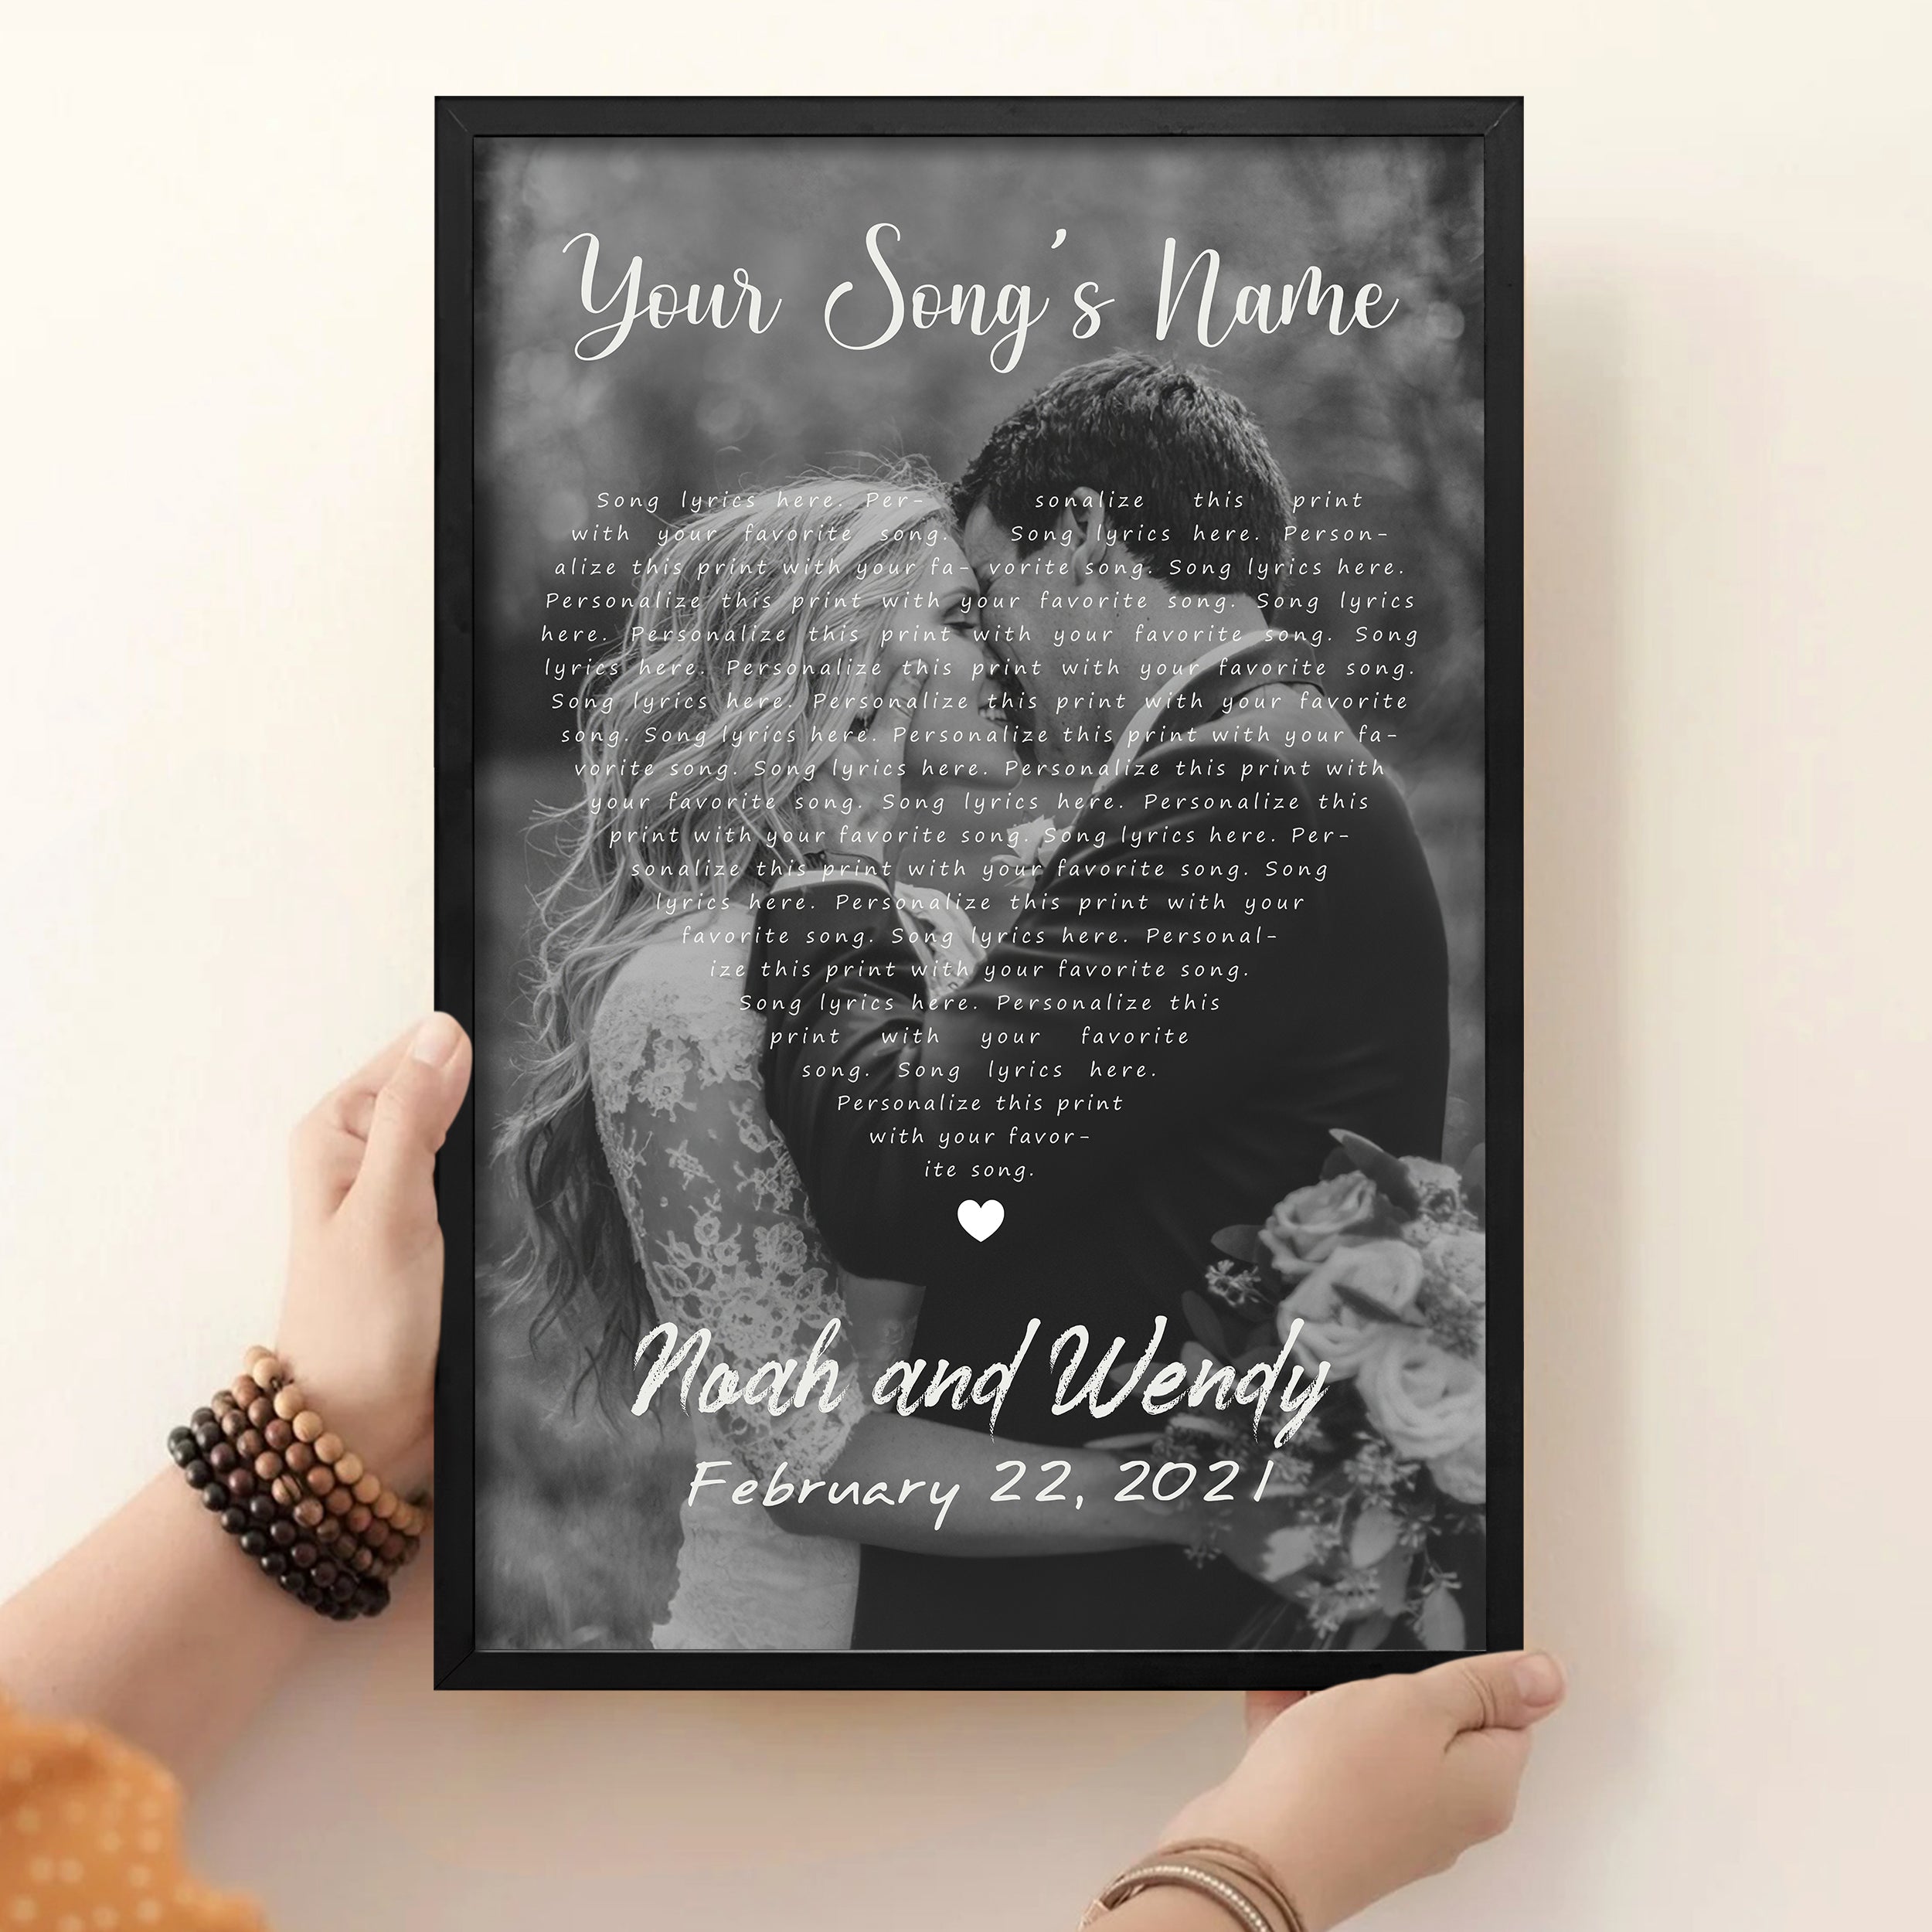 Custom Song Lyrics Poster Canvas Wall Art Black White Color Heart Wedding One Year Anniversary Personalized Print For Couples